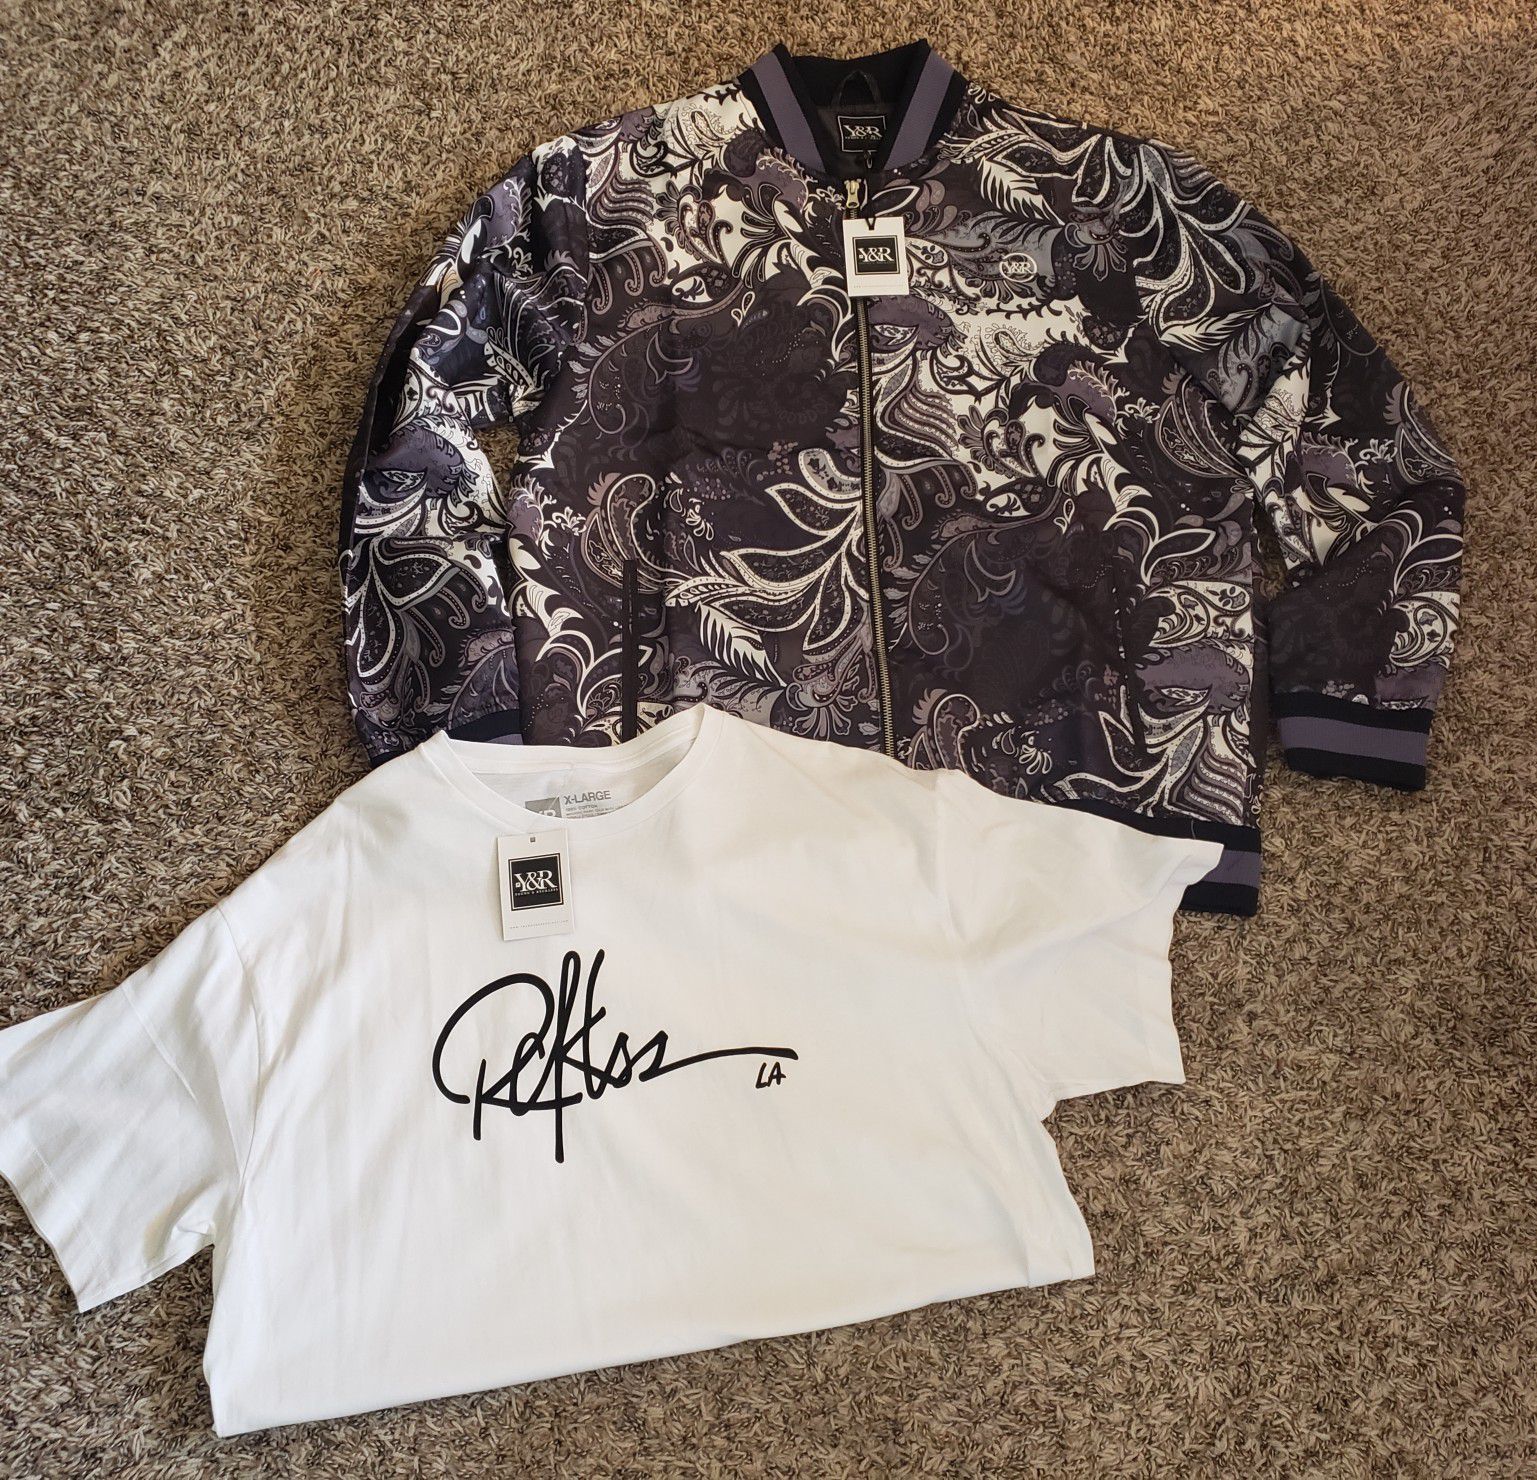 NEW YOUNG AND RECKLESS BOMBER JACKET AND SHIRT BOTH SIZE XL FOR SALE!